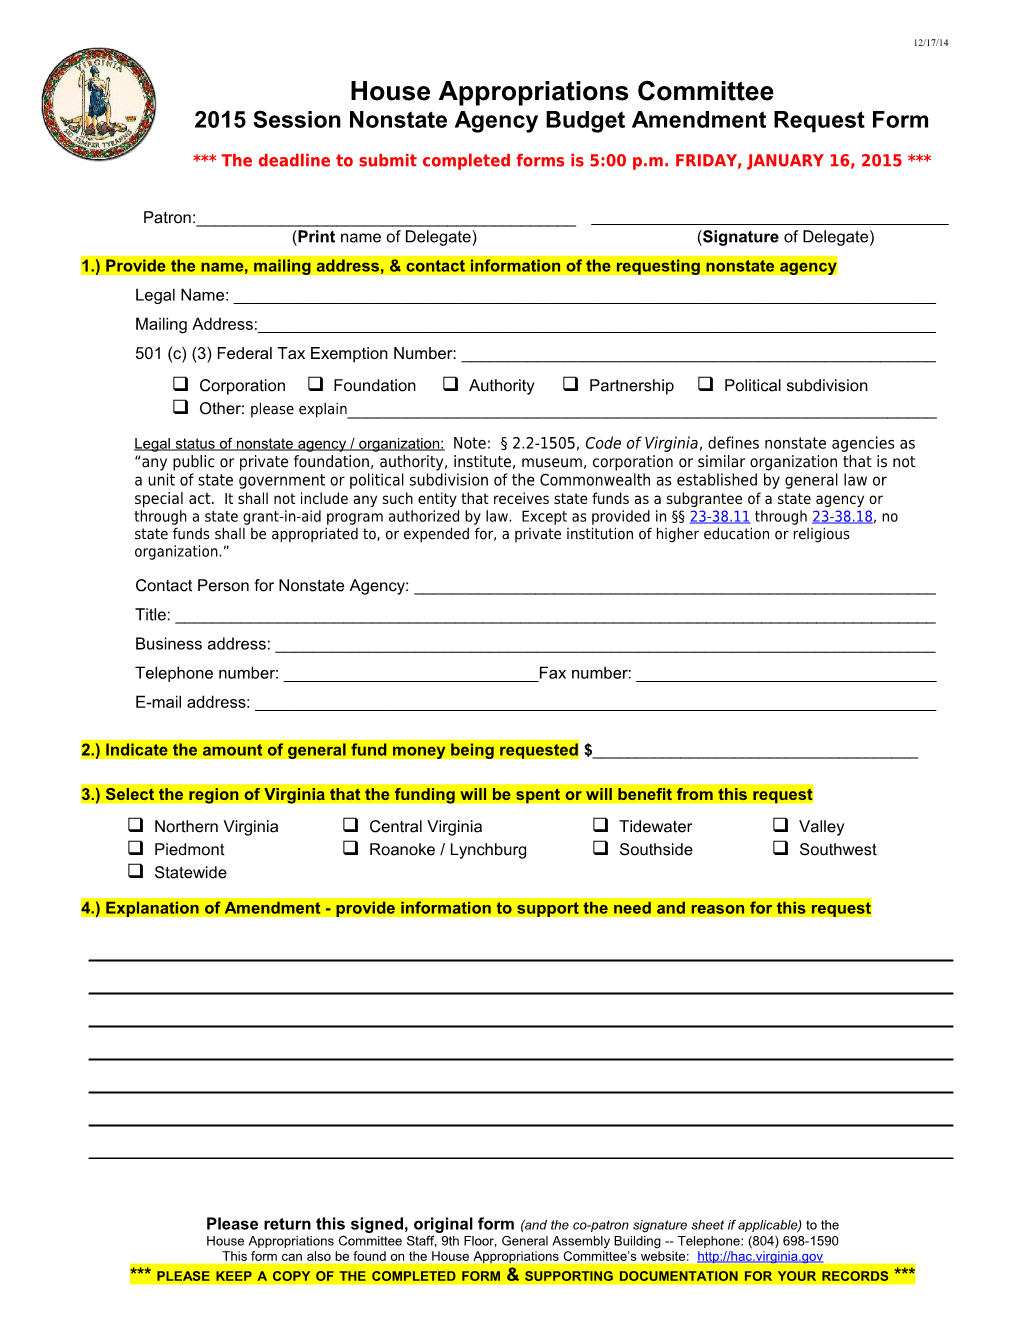 2015 Session Nonstate Agency Budget Amendment Request Form